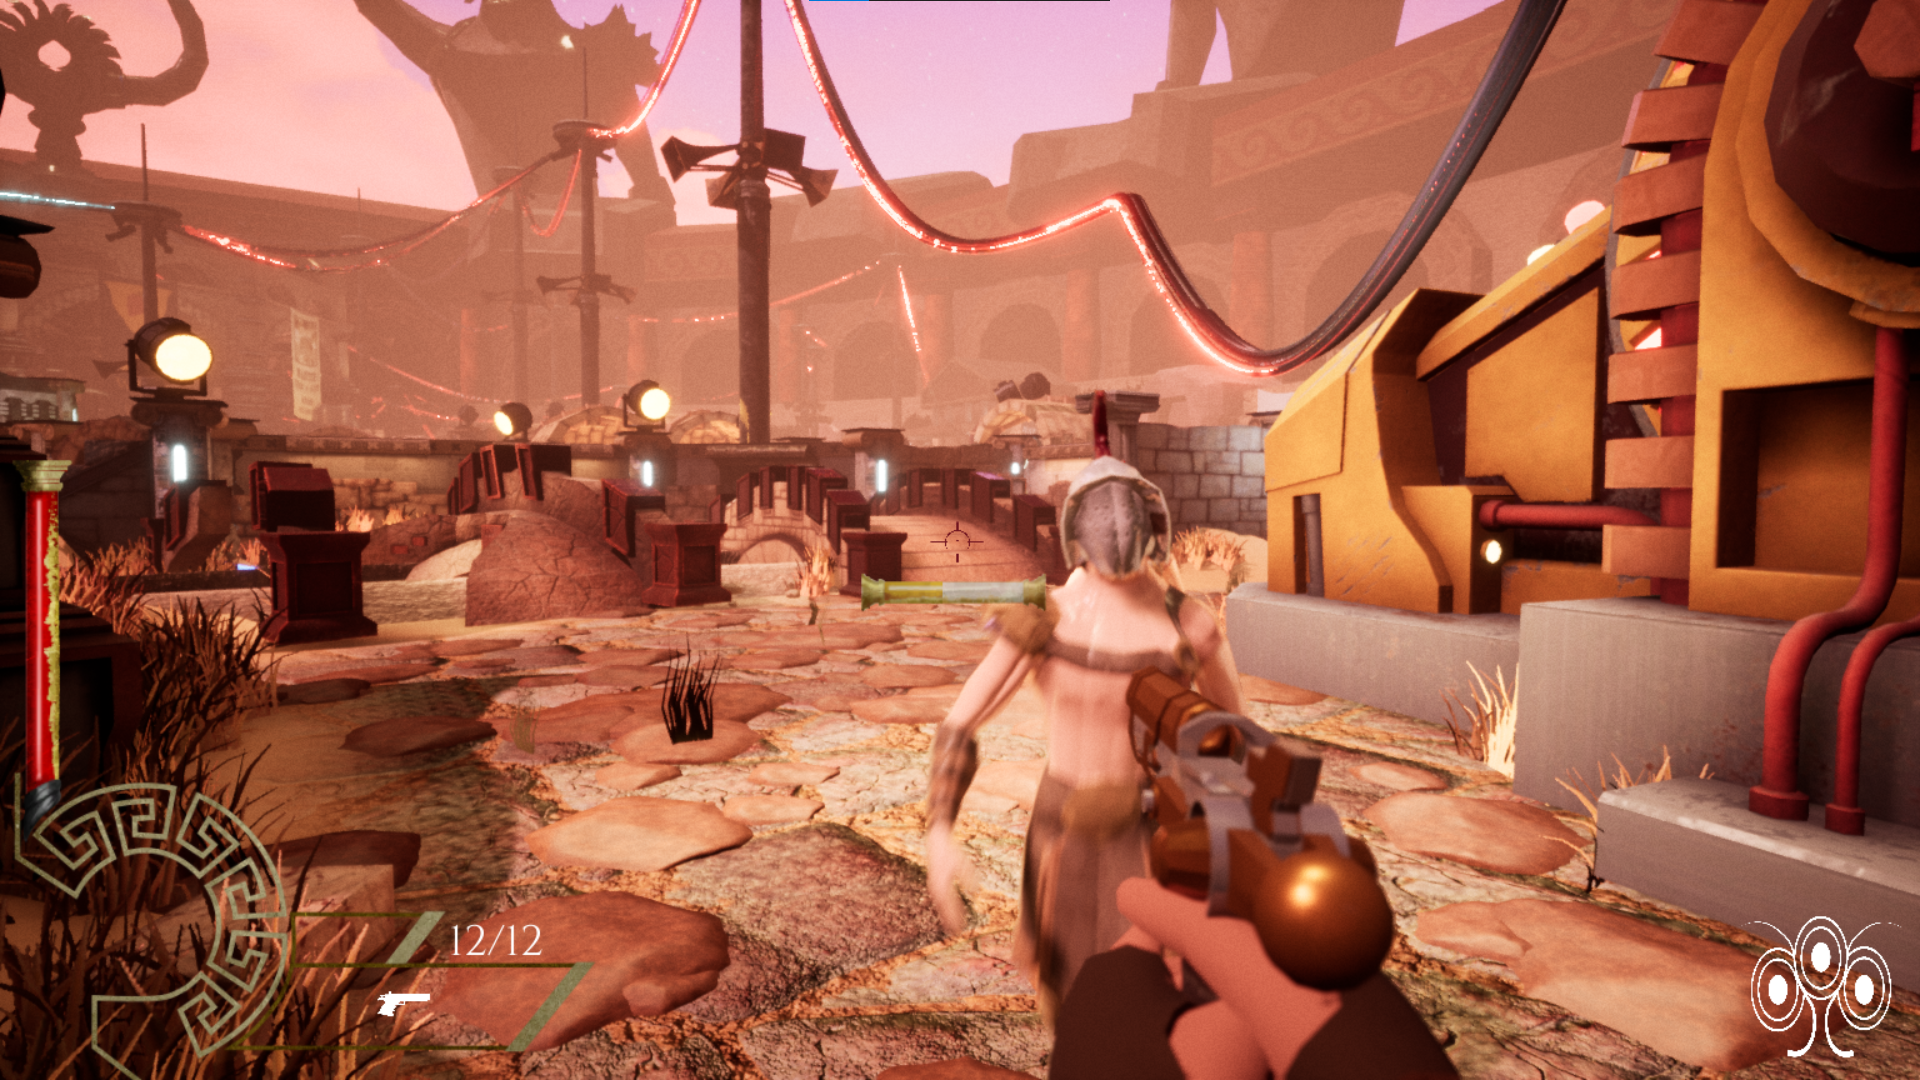 A screenshot of a video game co-developed by Ethan Edelen. It shows the interior of a sprawling, modernized roman colosseum at dusk.